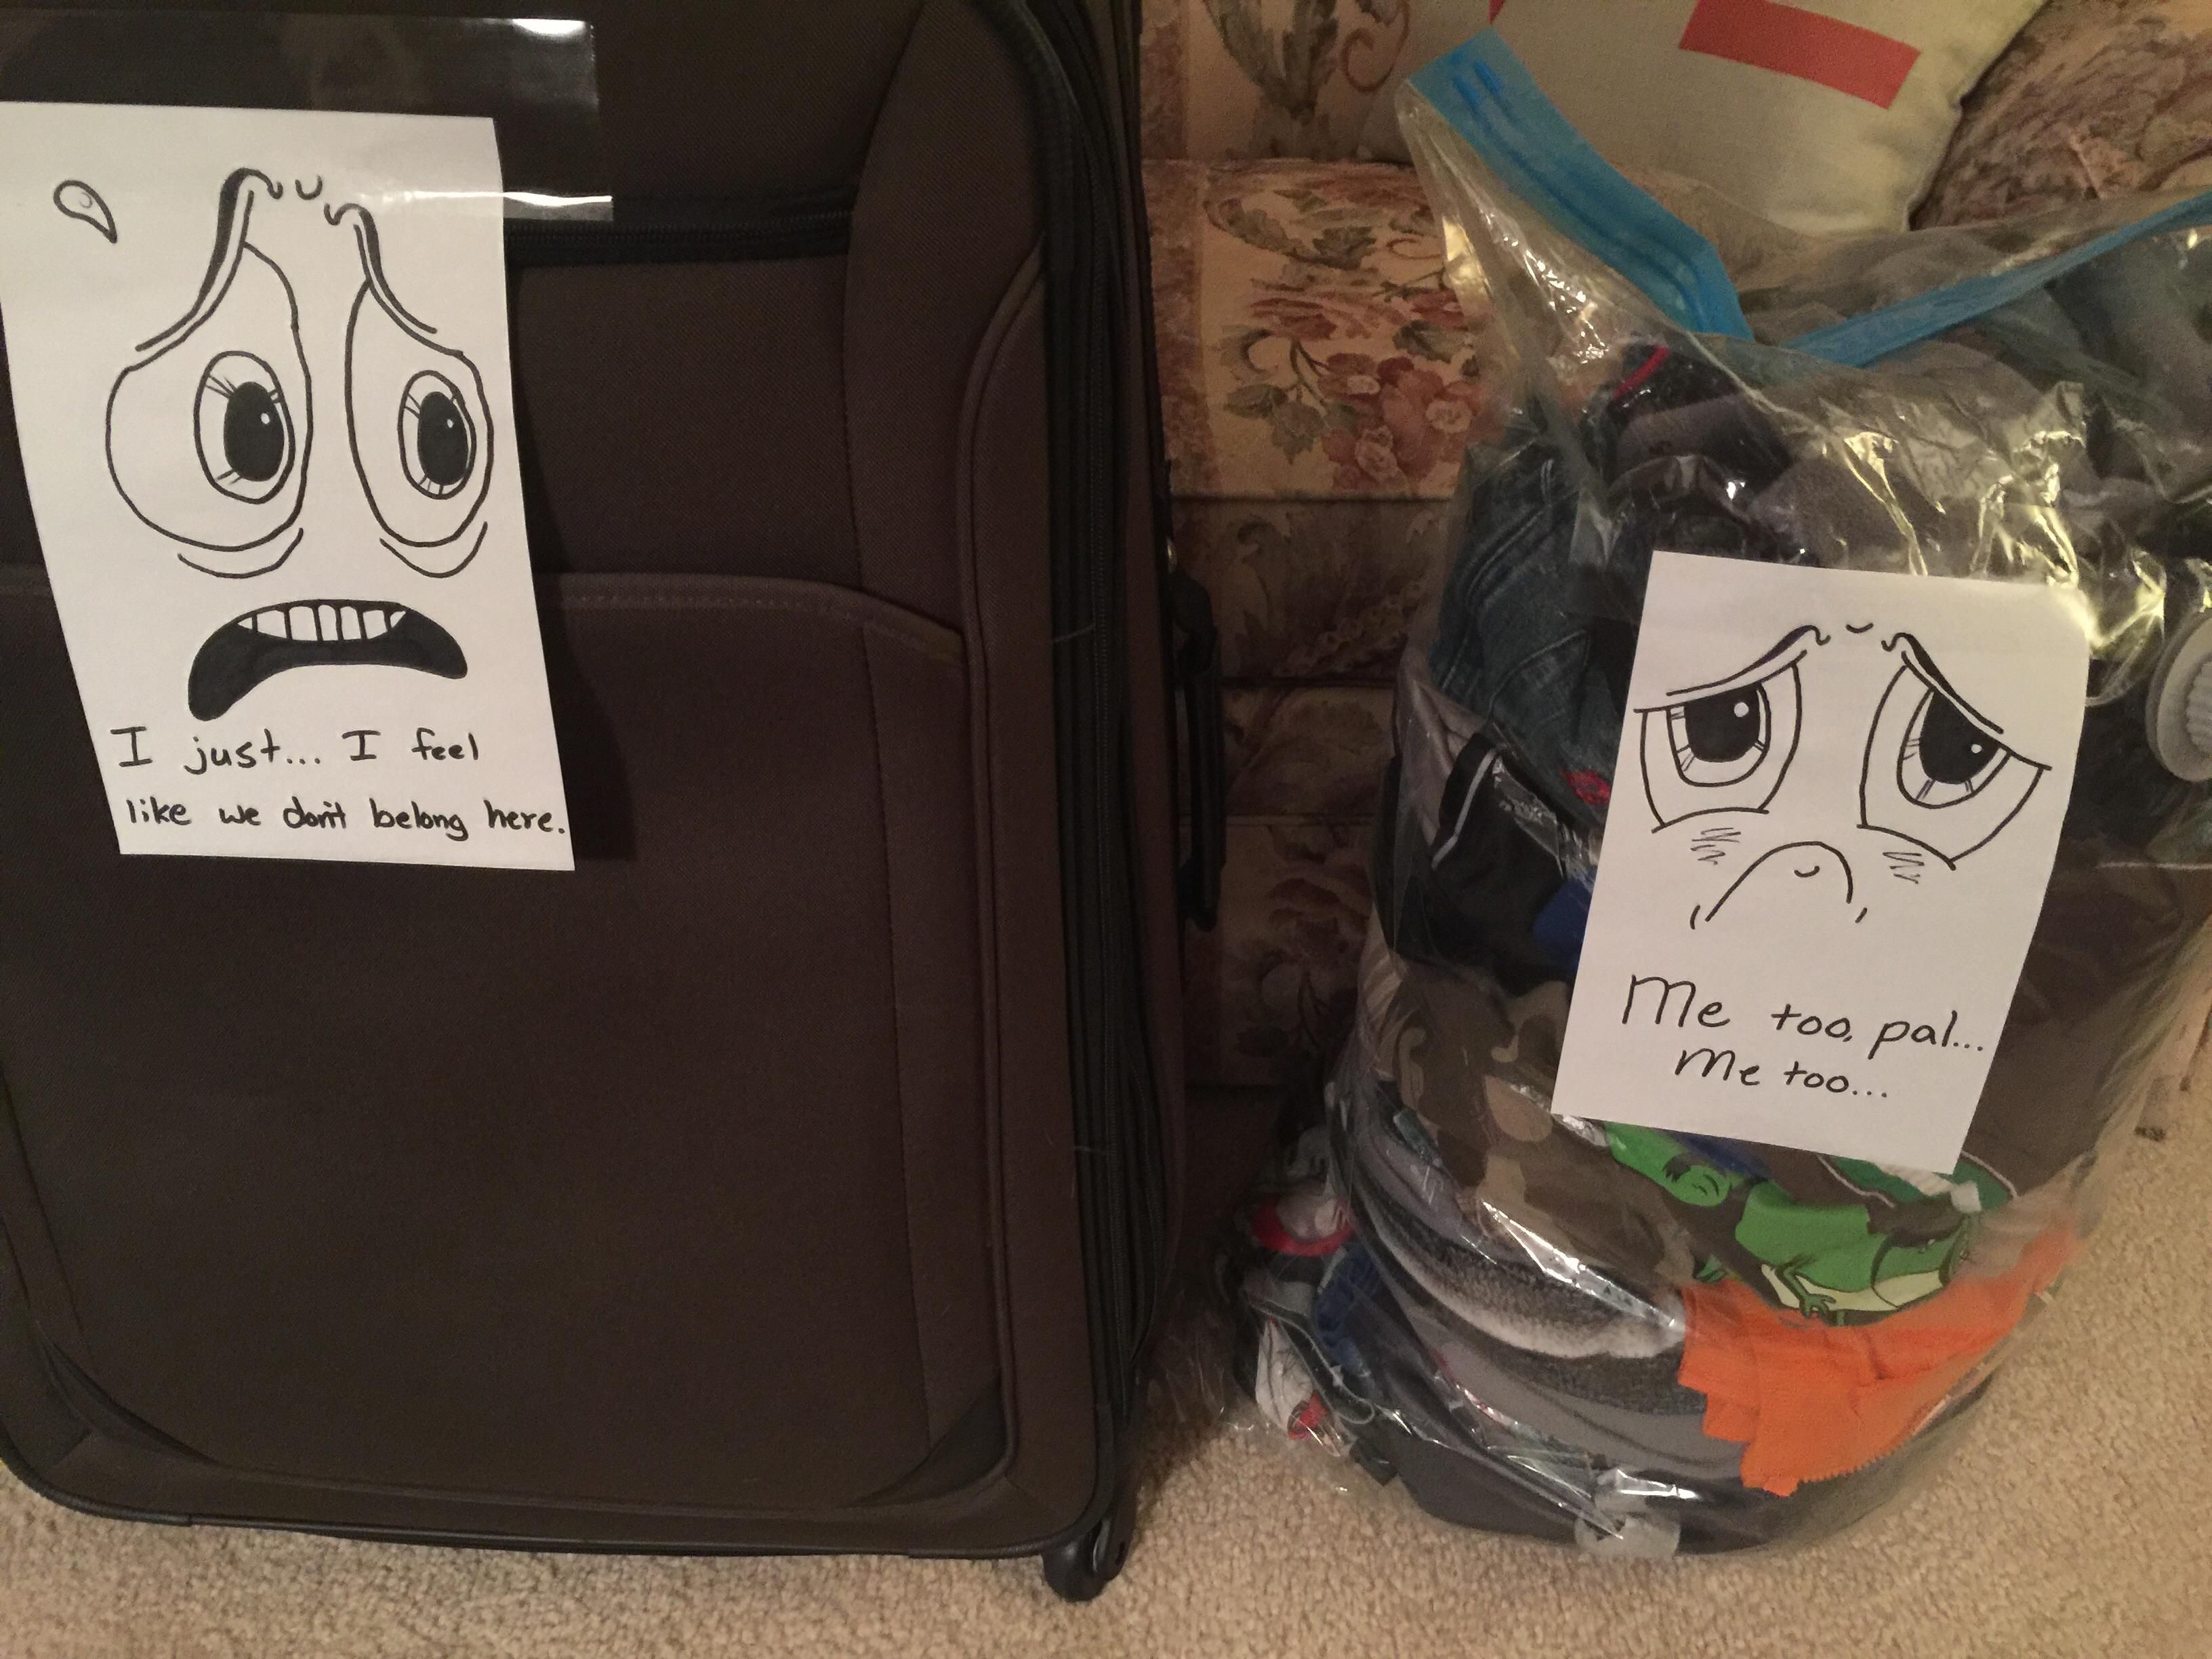 I get super artsy when my wife leaves luggage in the living room for two weeks.